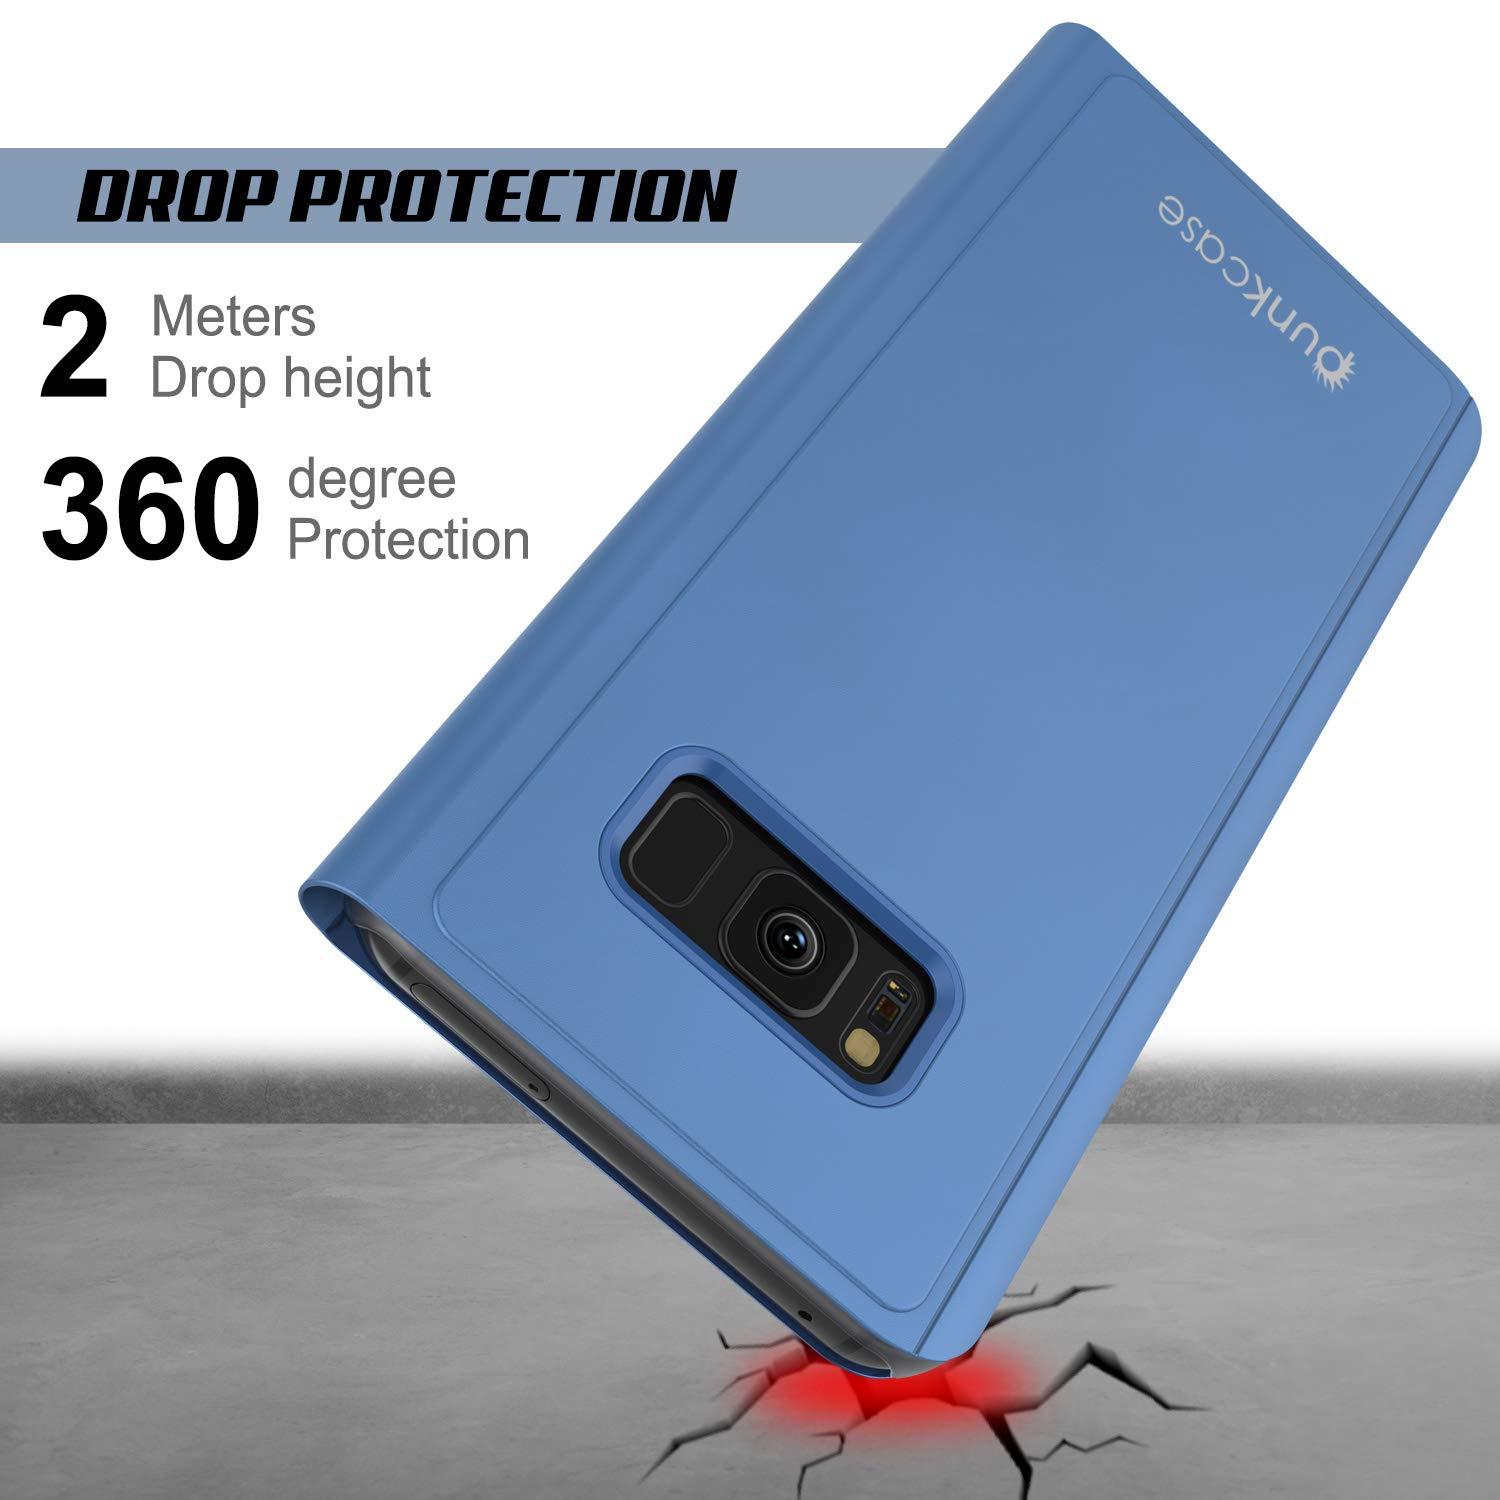 Punkcase S8  Reflector Case Protective Flip Cover [Blue]